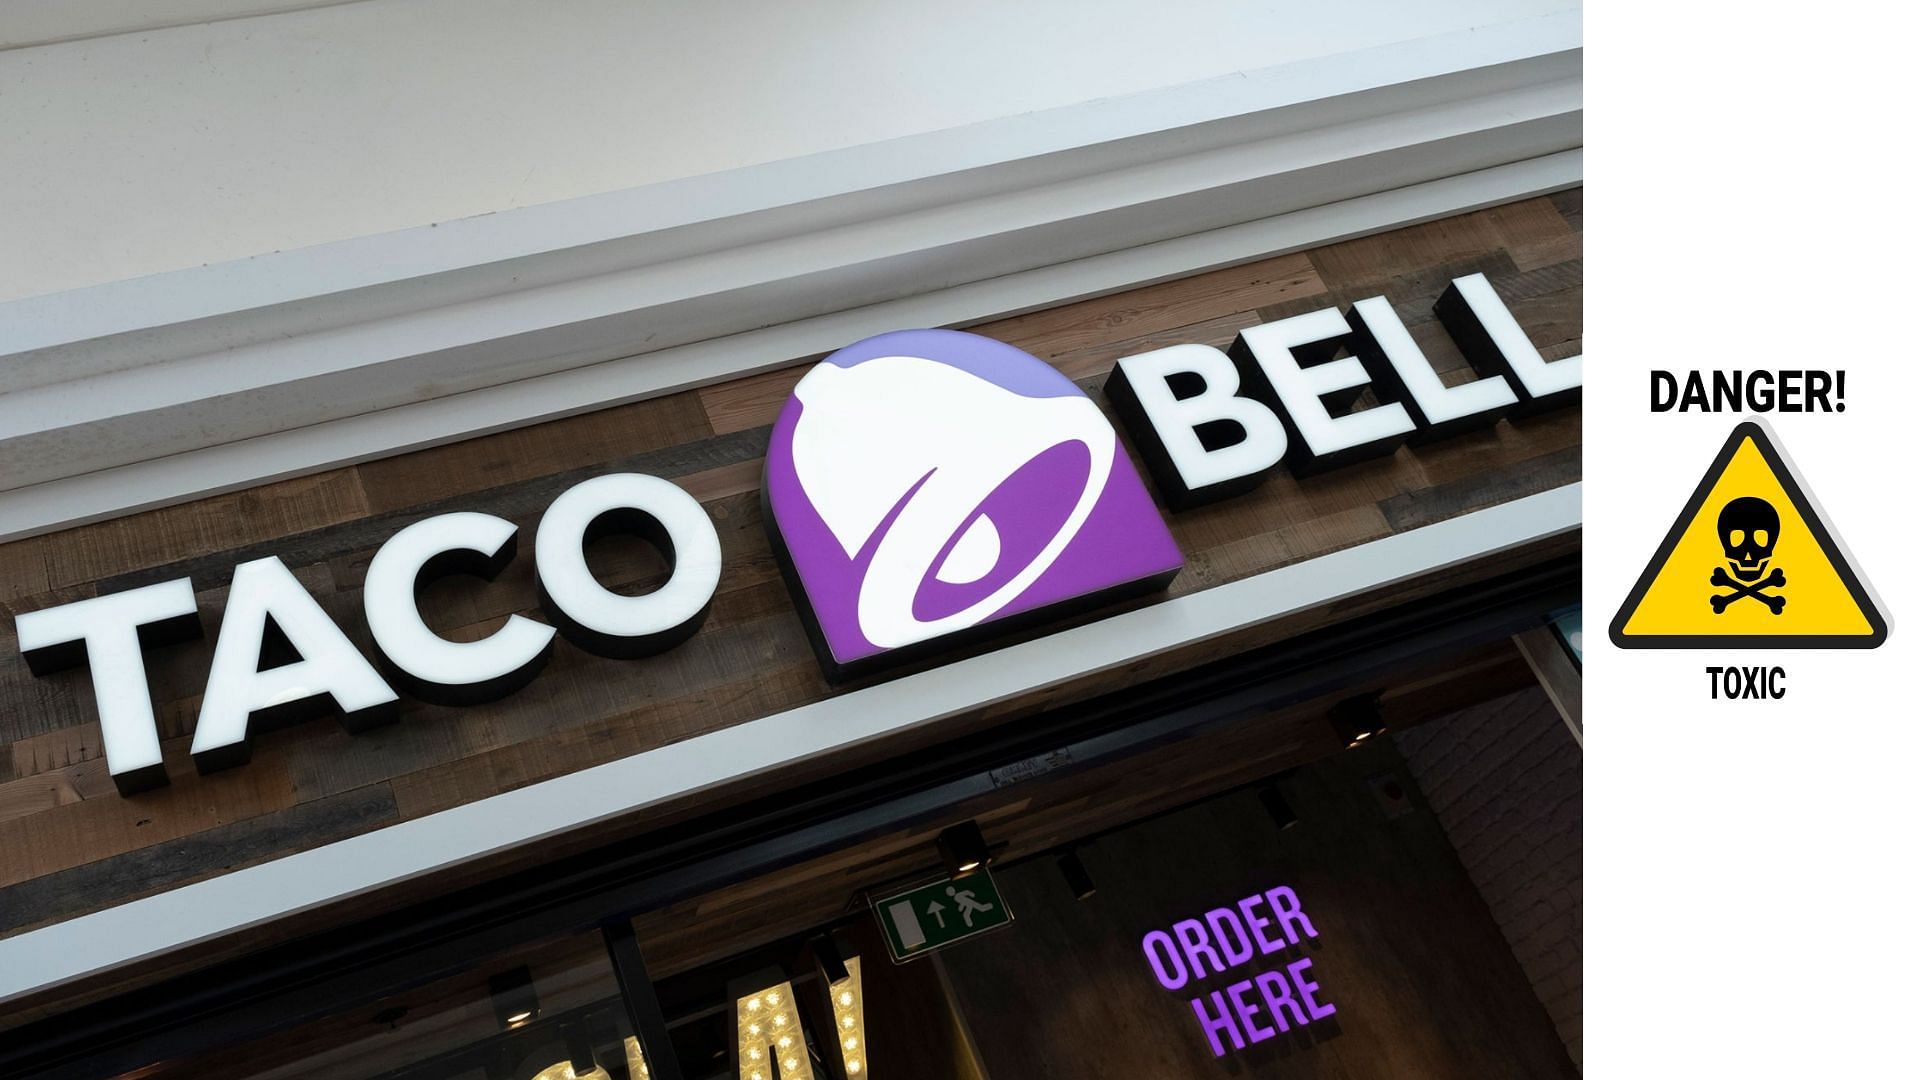 Taco Bell finds itself in legal troubles as toxic burritos leave customers hospitalized (Image via Mike Kemp/Getty Images/Vecteezy)